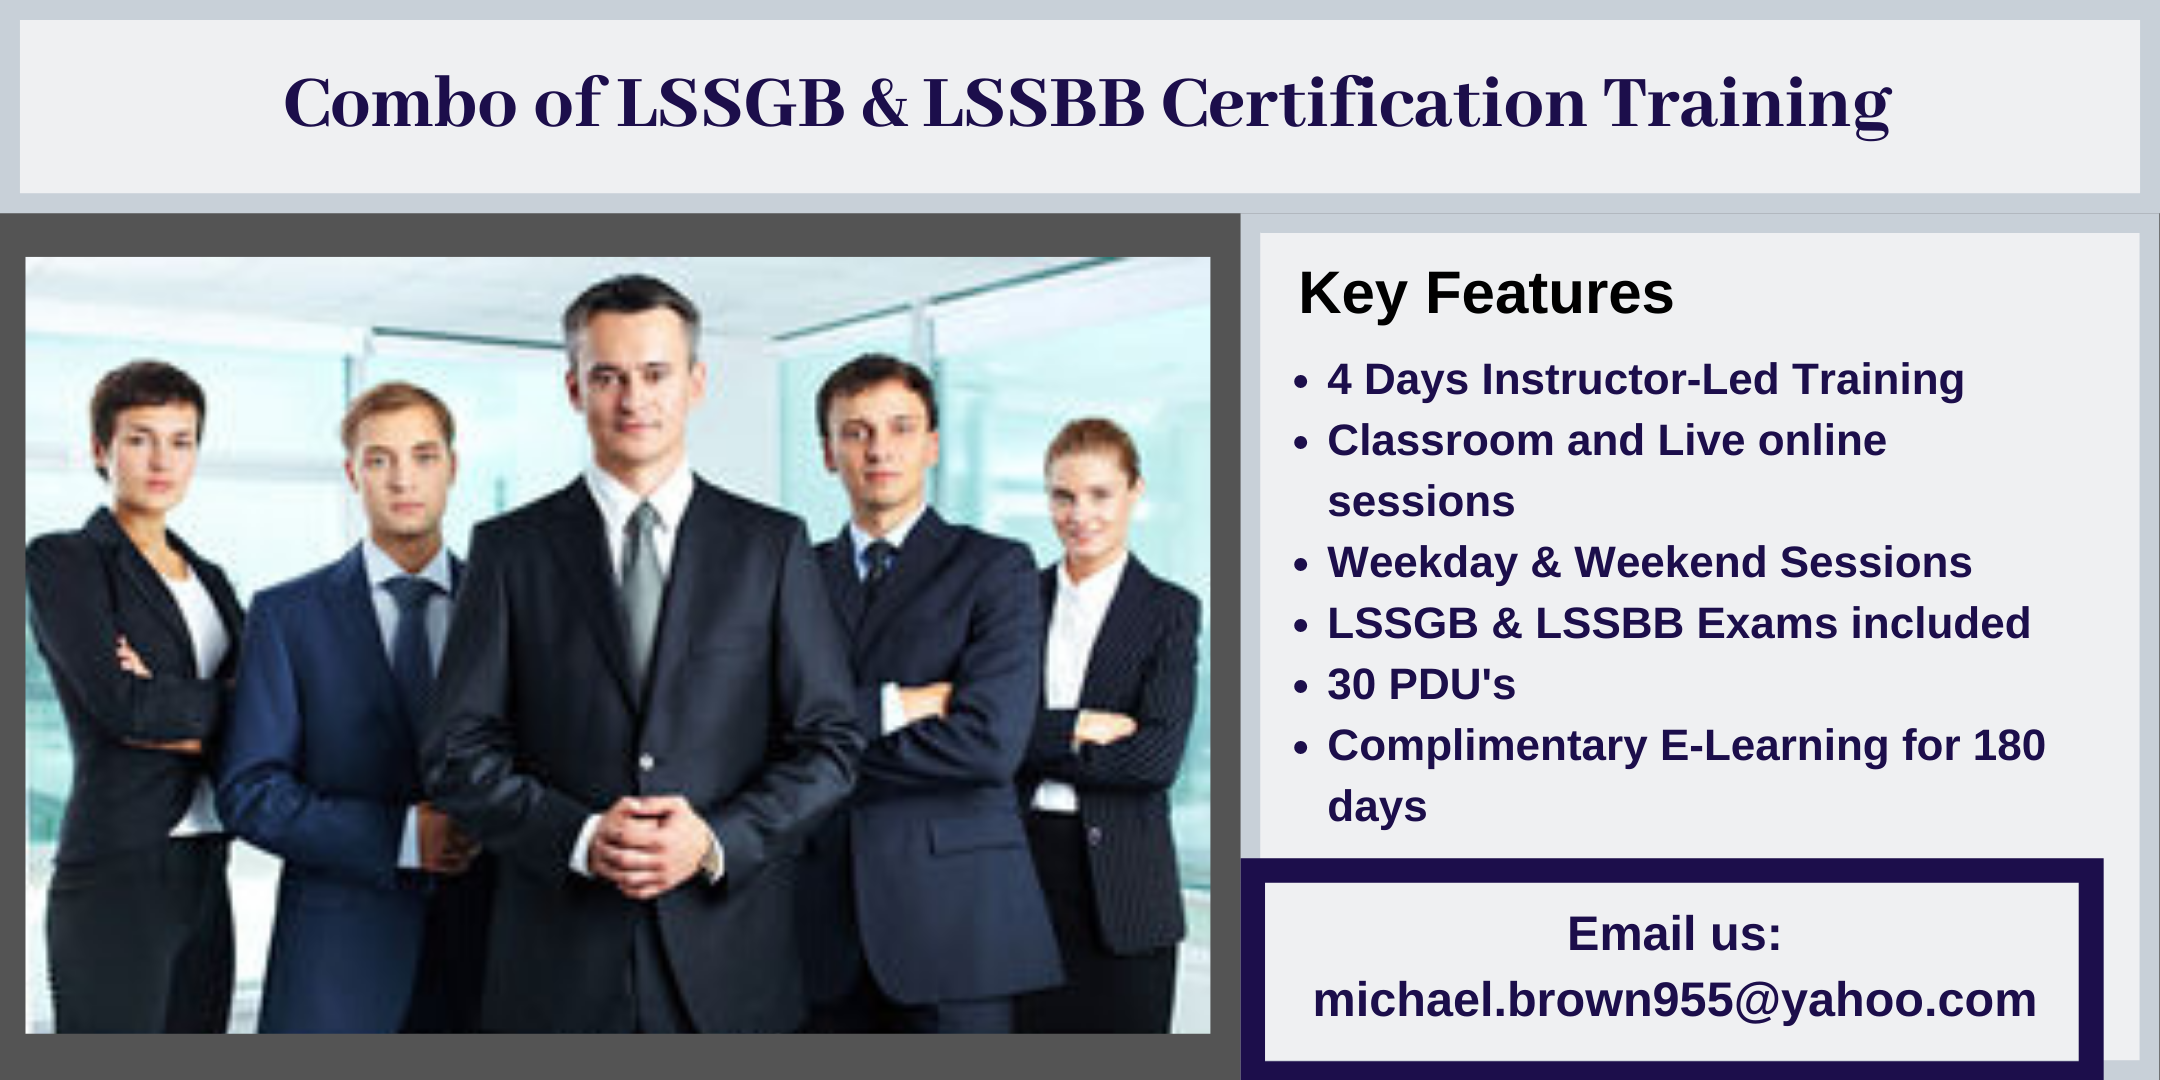 Combo of LSSGB & LSSBB 4 days Certification Training in Los Altos, CA